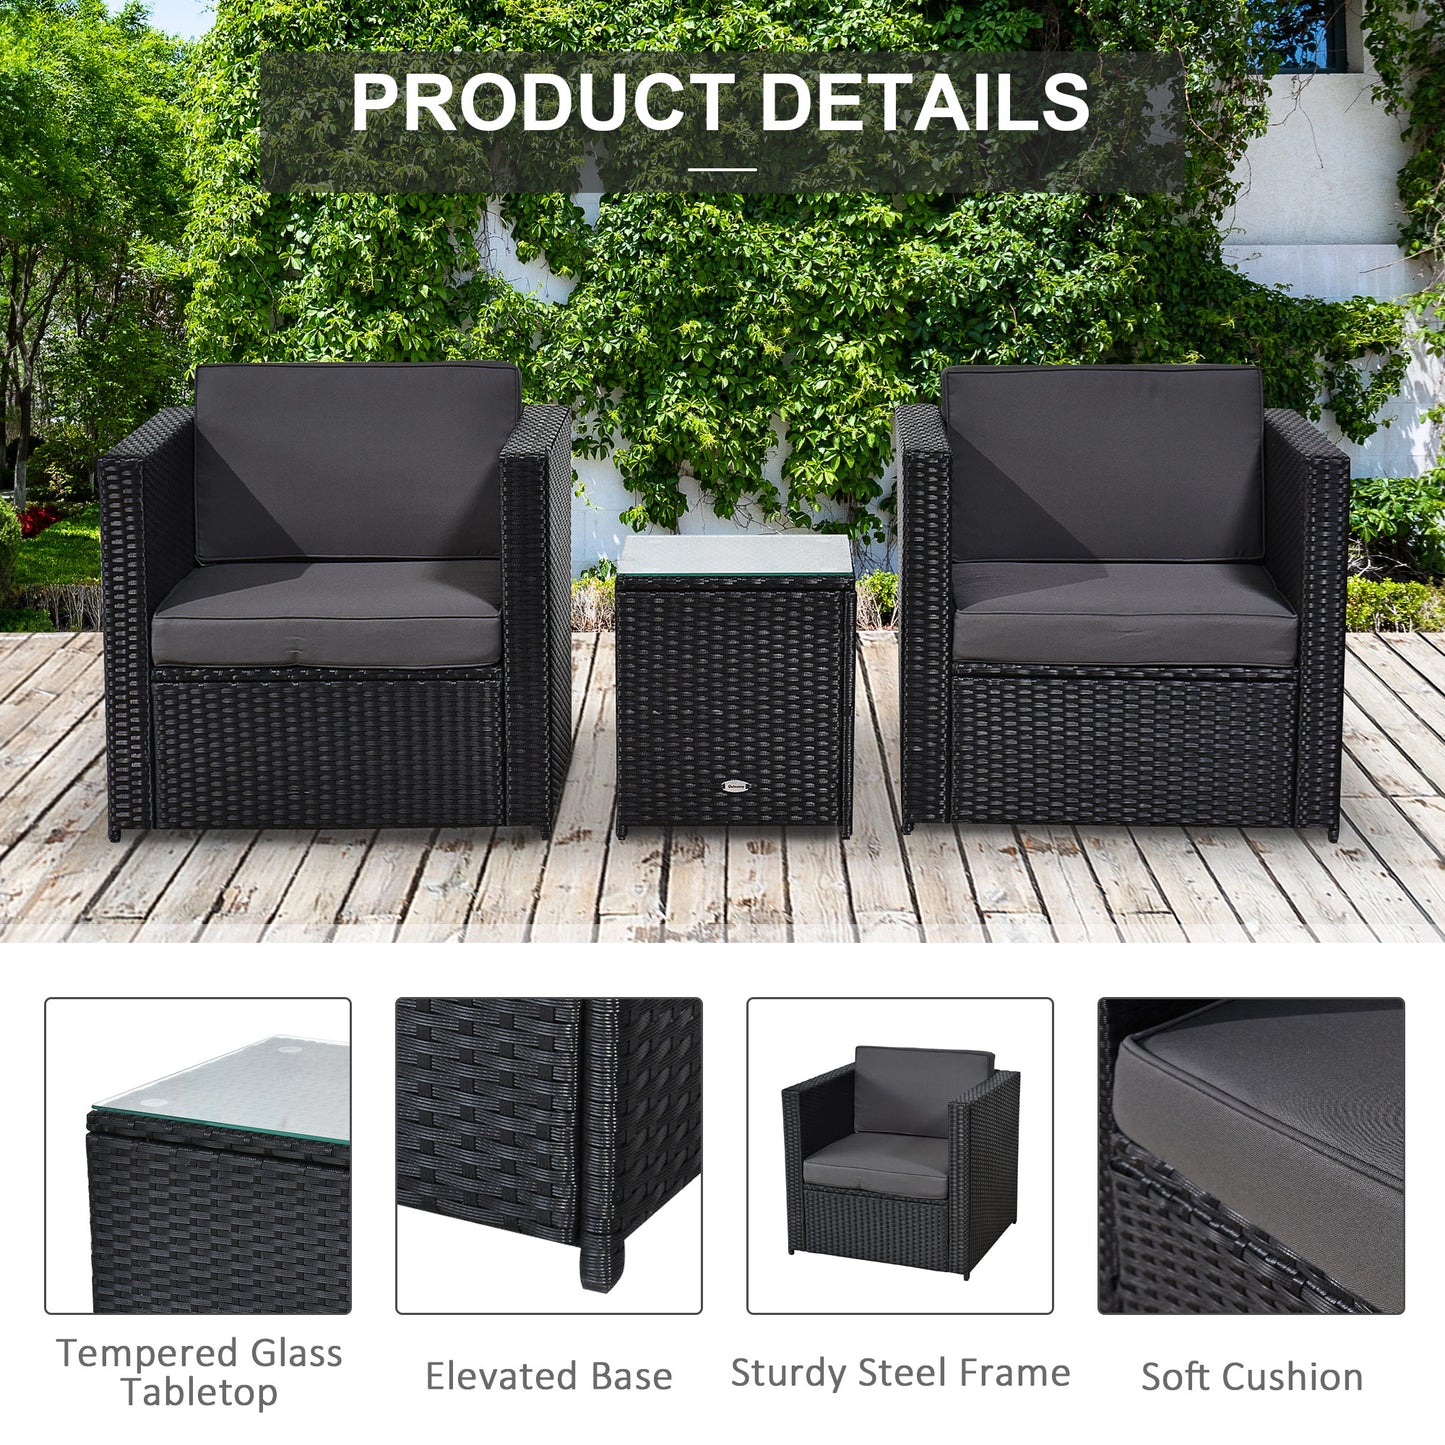 Outsunny 3 pcs PE Rattan Garden Furniture Patio Bistro Set Weave Conservatory Sofa Table and Chairs Set Black